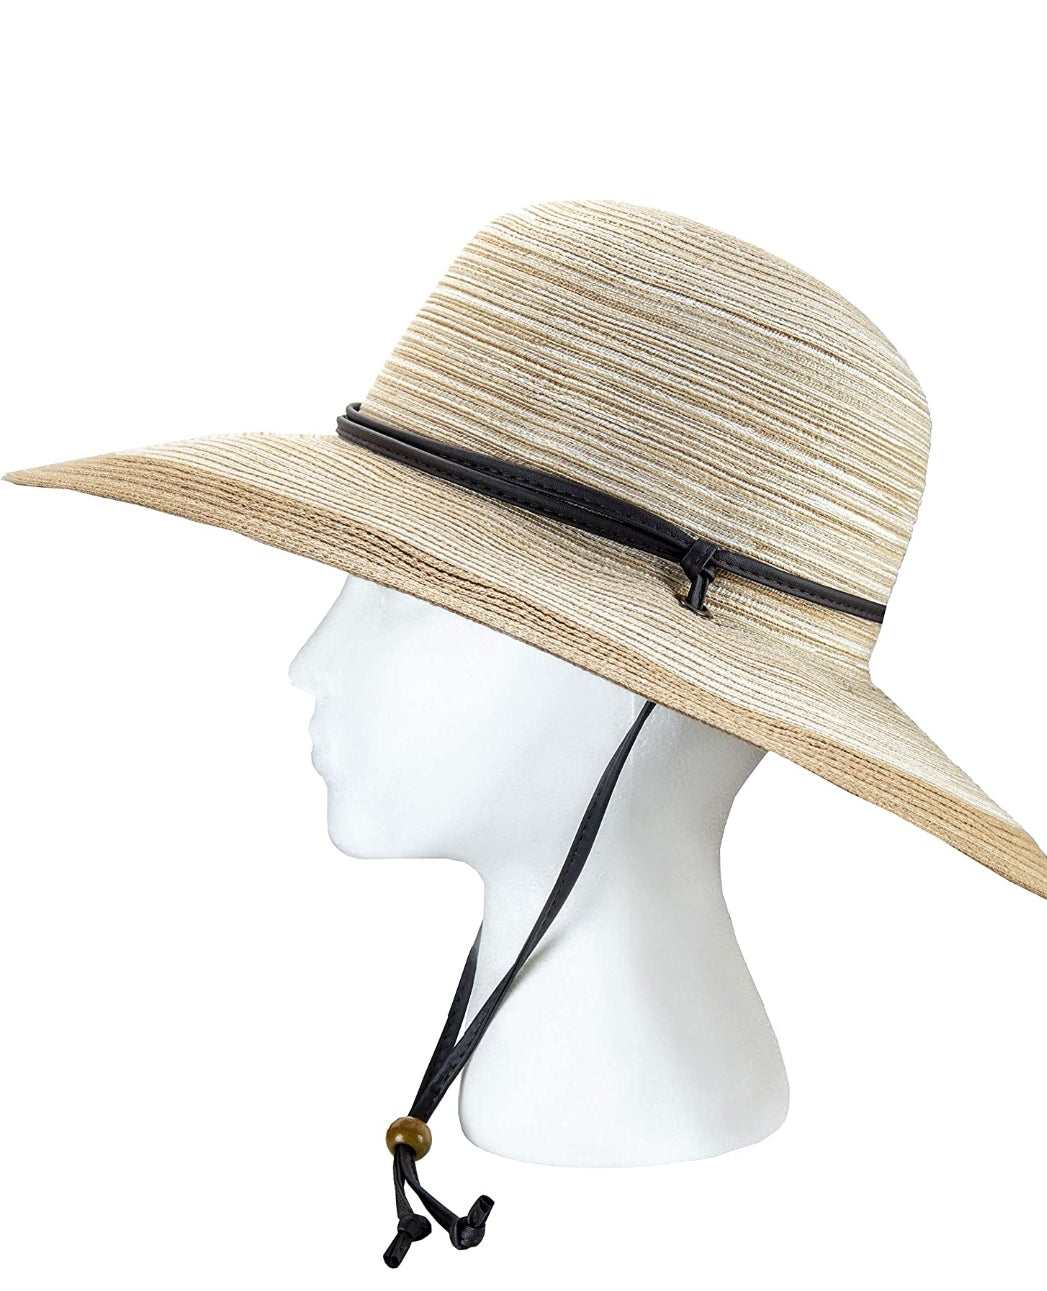 Women's Slogger Braided Hat's, UPF 50+ (Available in Duo Gray or Light Brown